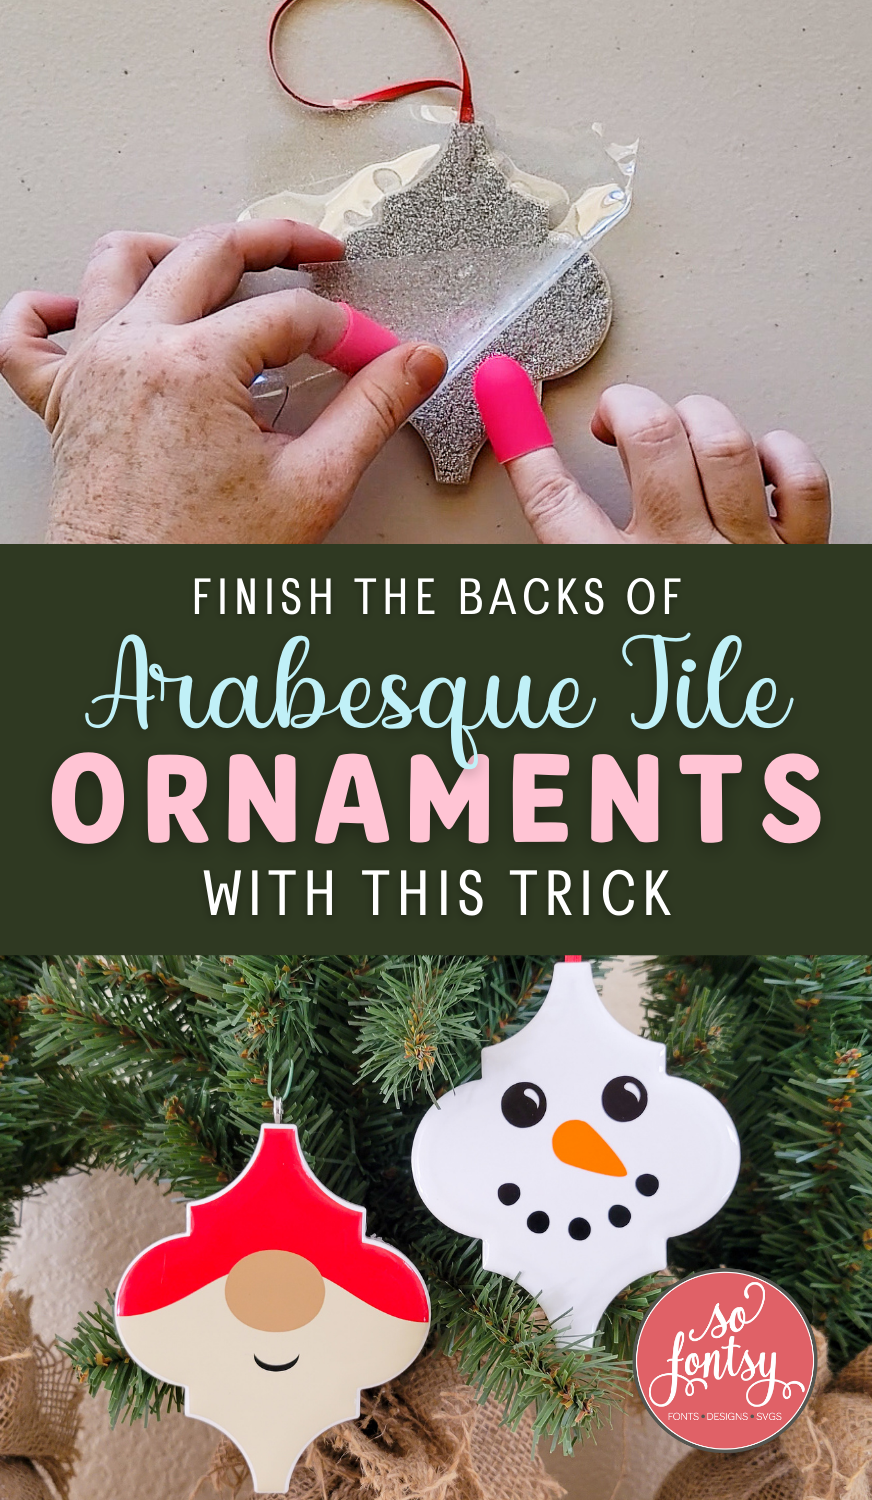 How to Finish Backs of Arabesque Tile Ornaments